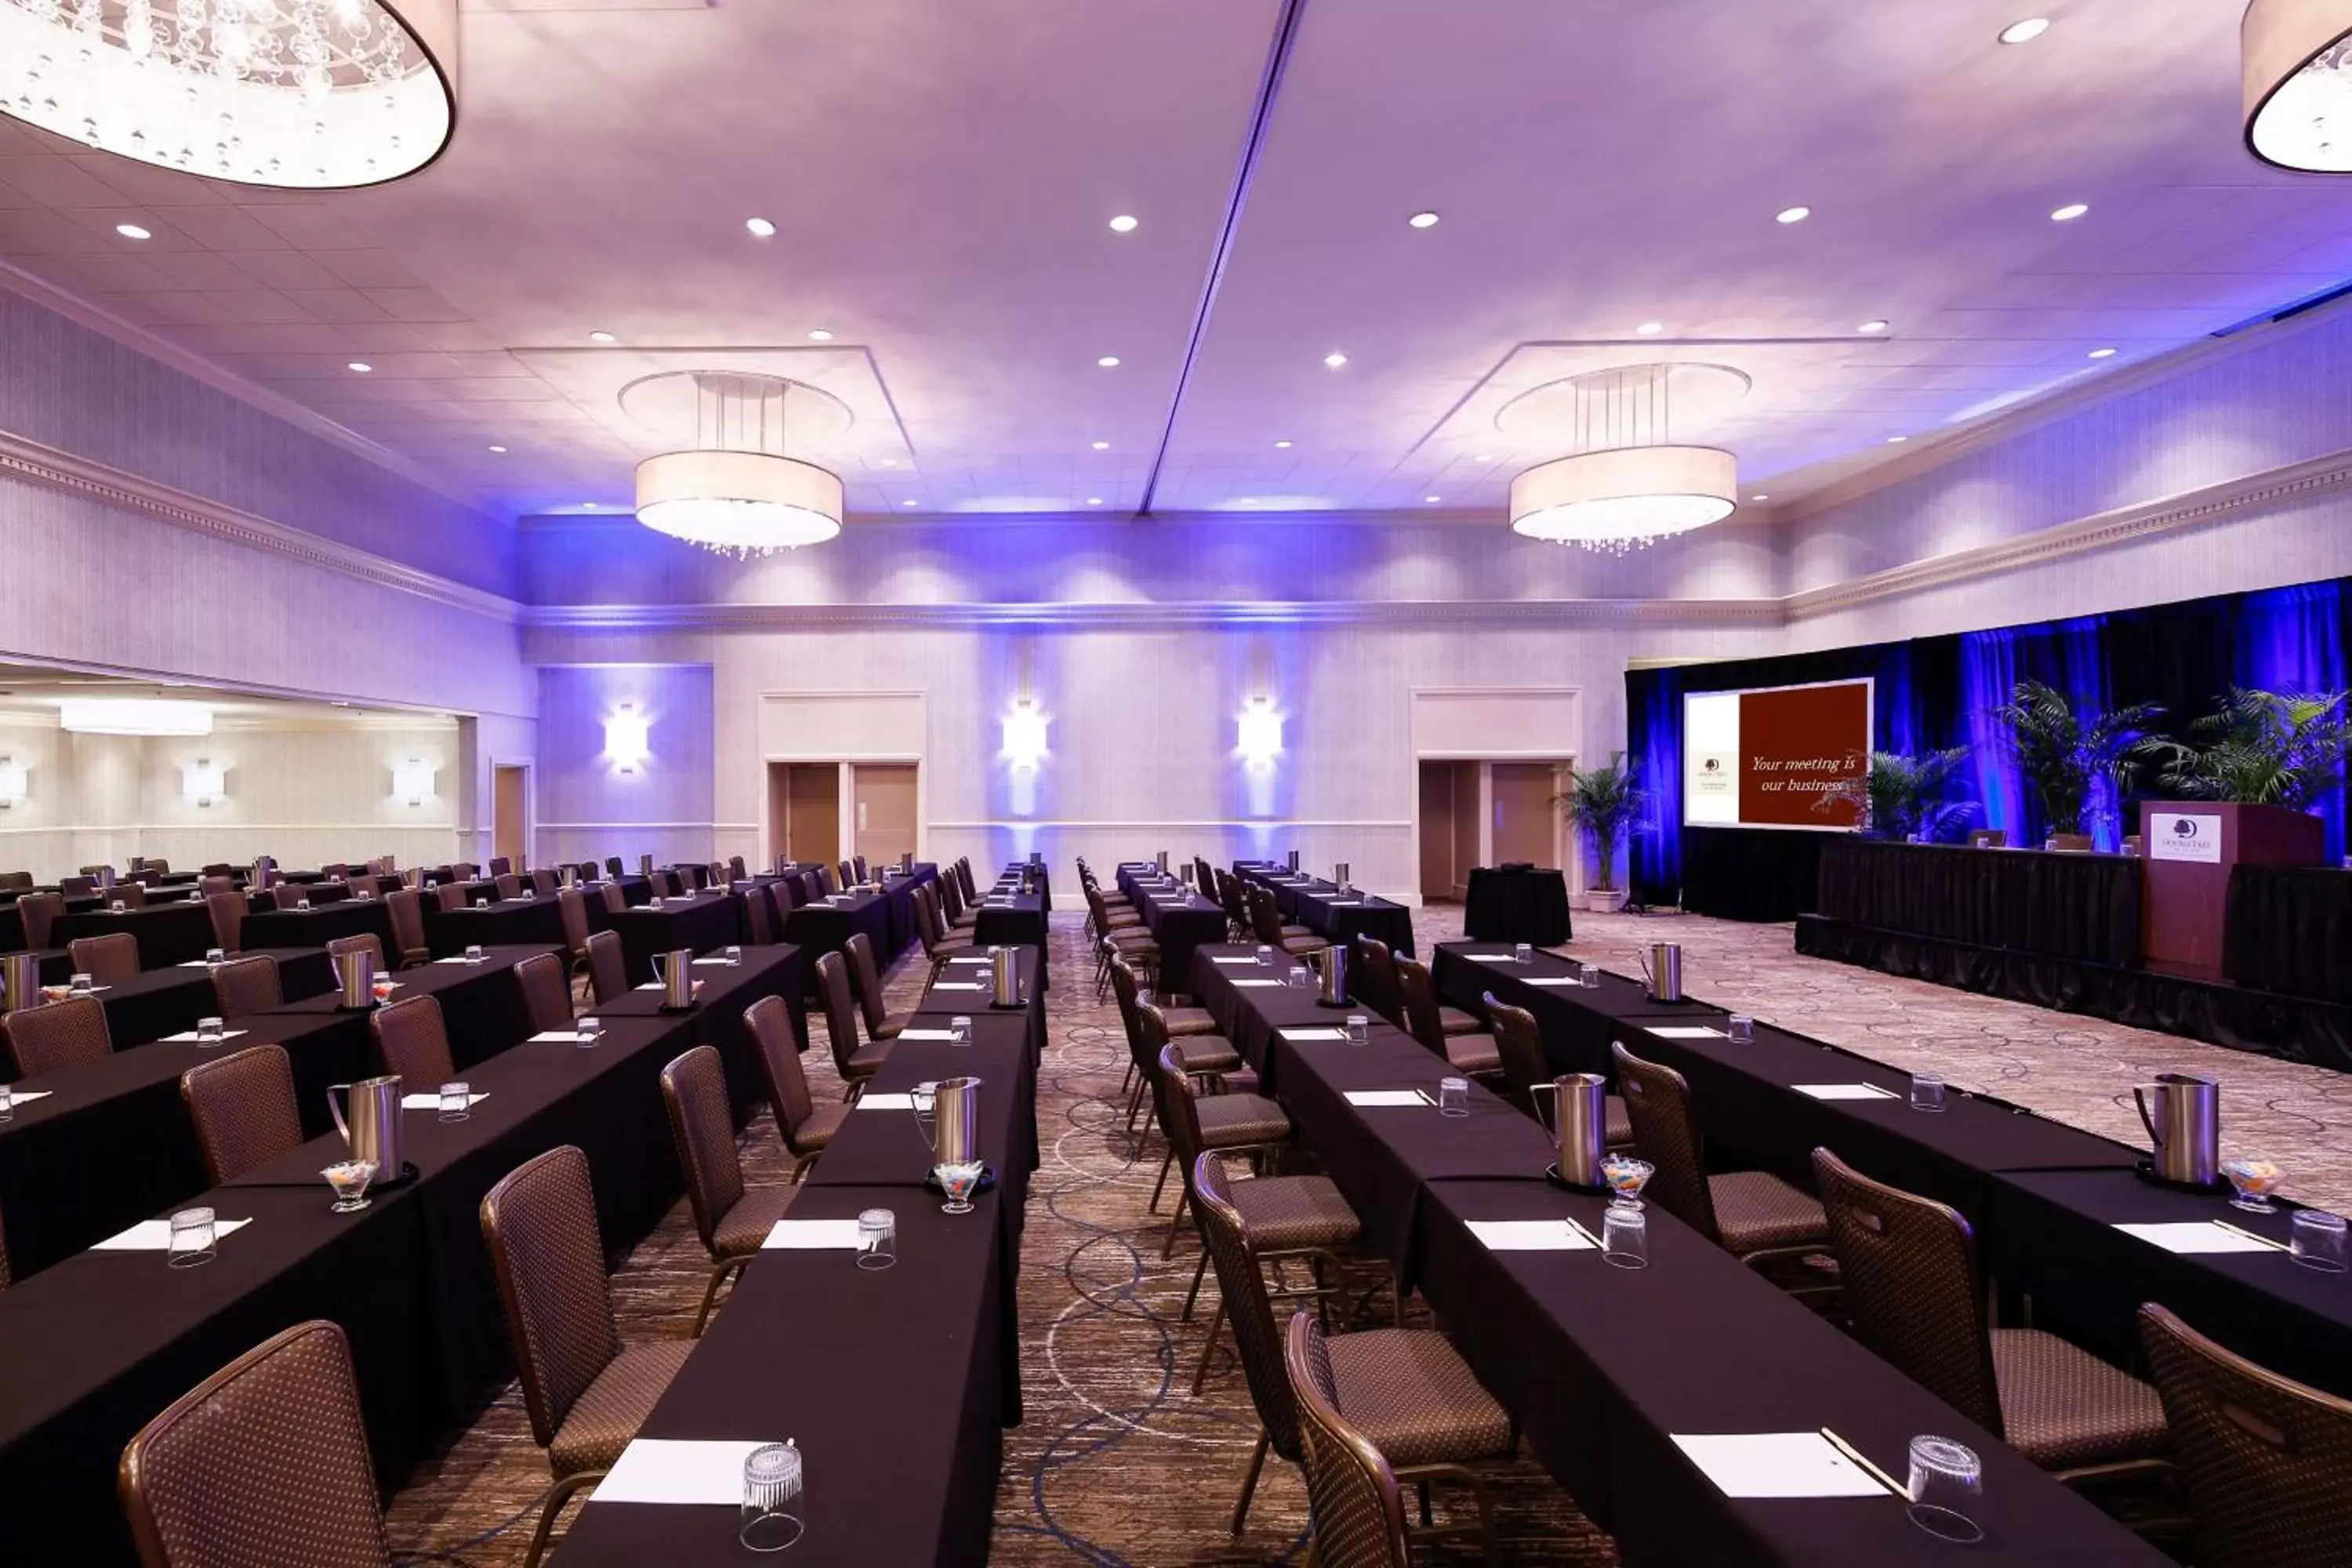 Meeting/conference room in DoubleTree by Hilton Jacksonville Riverfront, FL